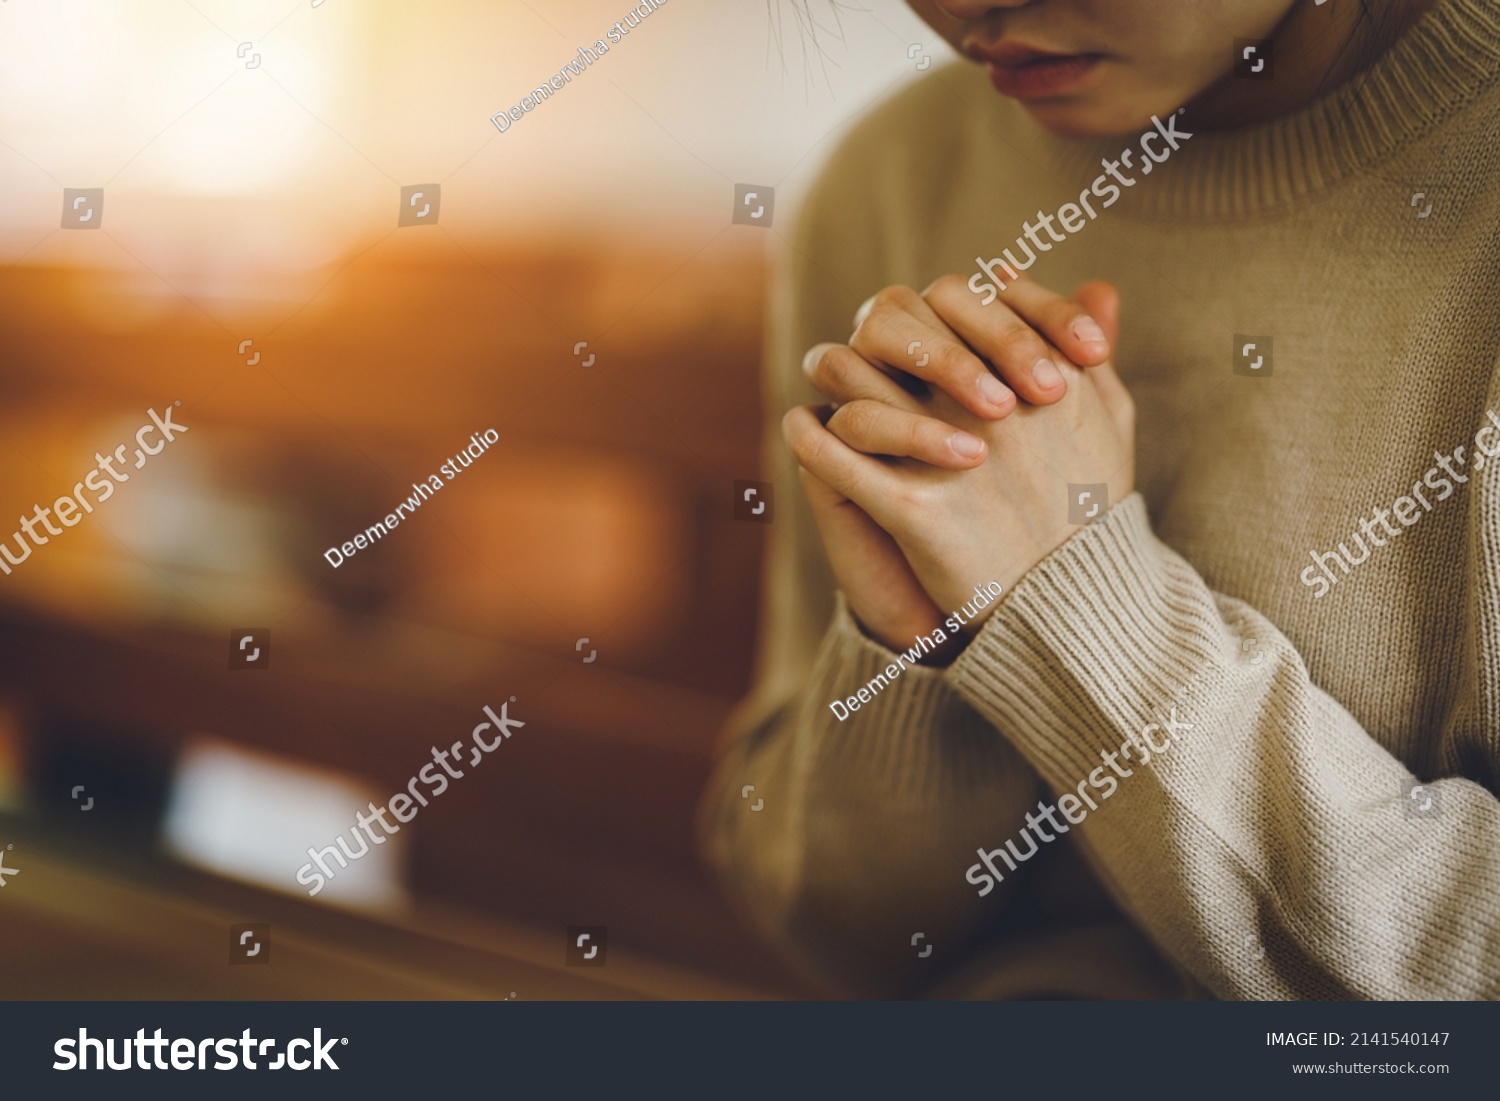 Christian life crisis prayer to god. Women Pray for god blessing to wishing have a better life. Hands praying to god with the bible. believe in goodness. Holding hands in prayer on a wooden table. #2141540147